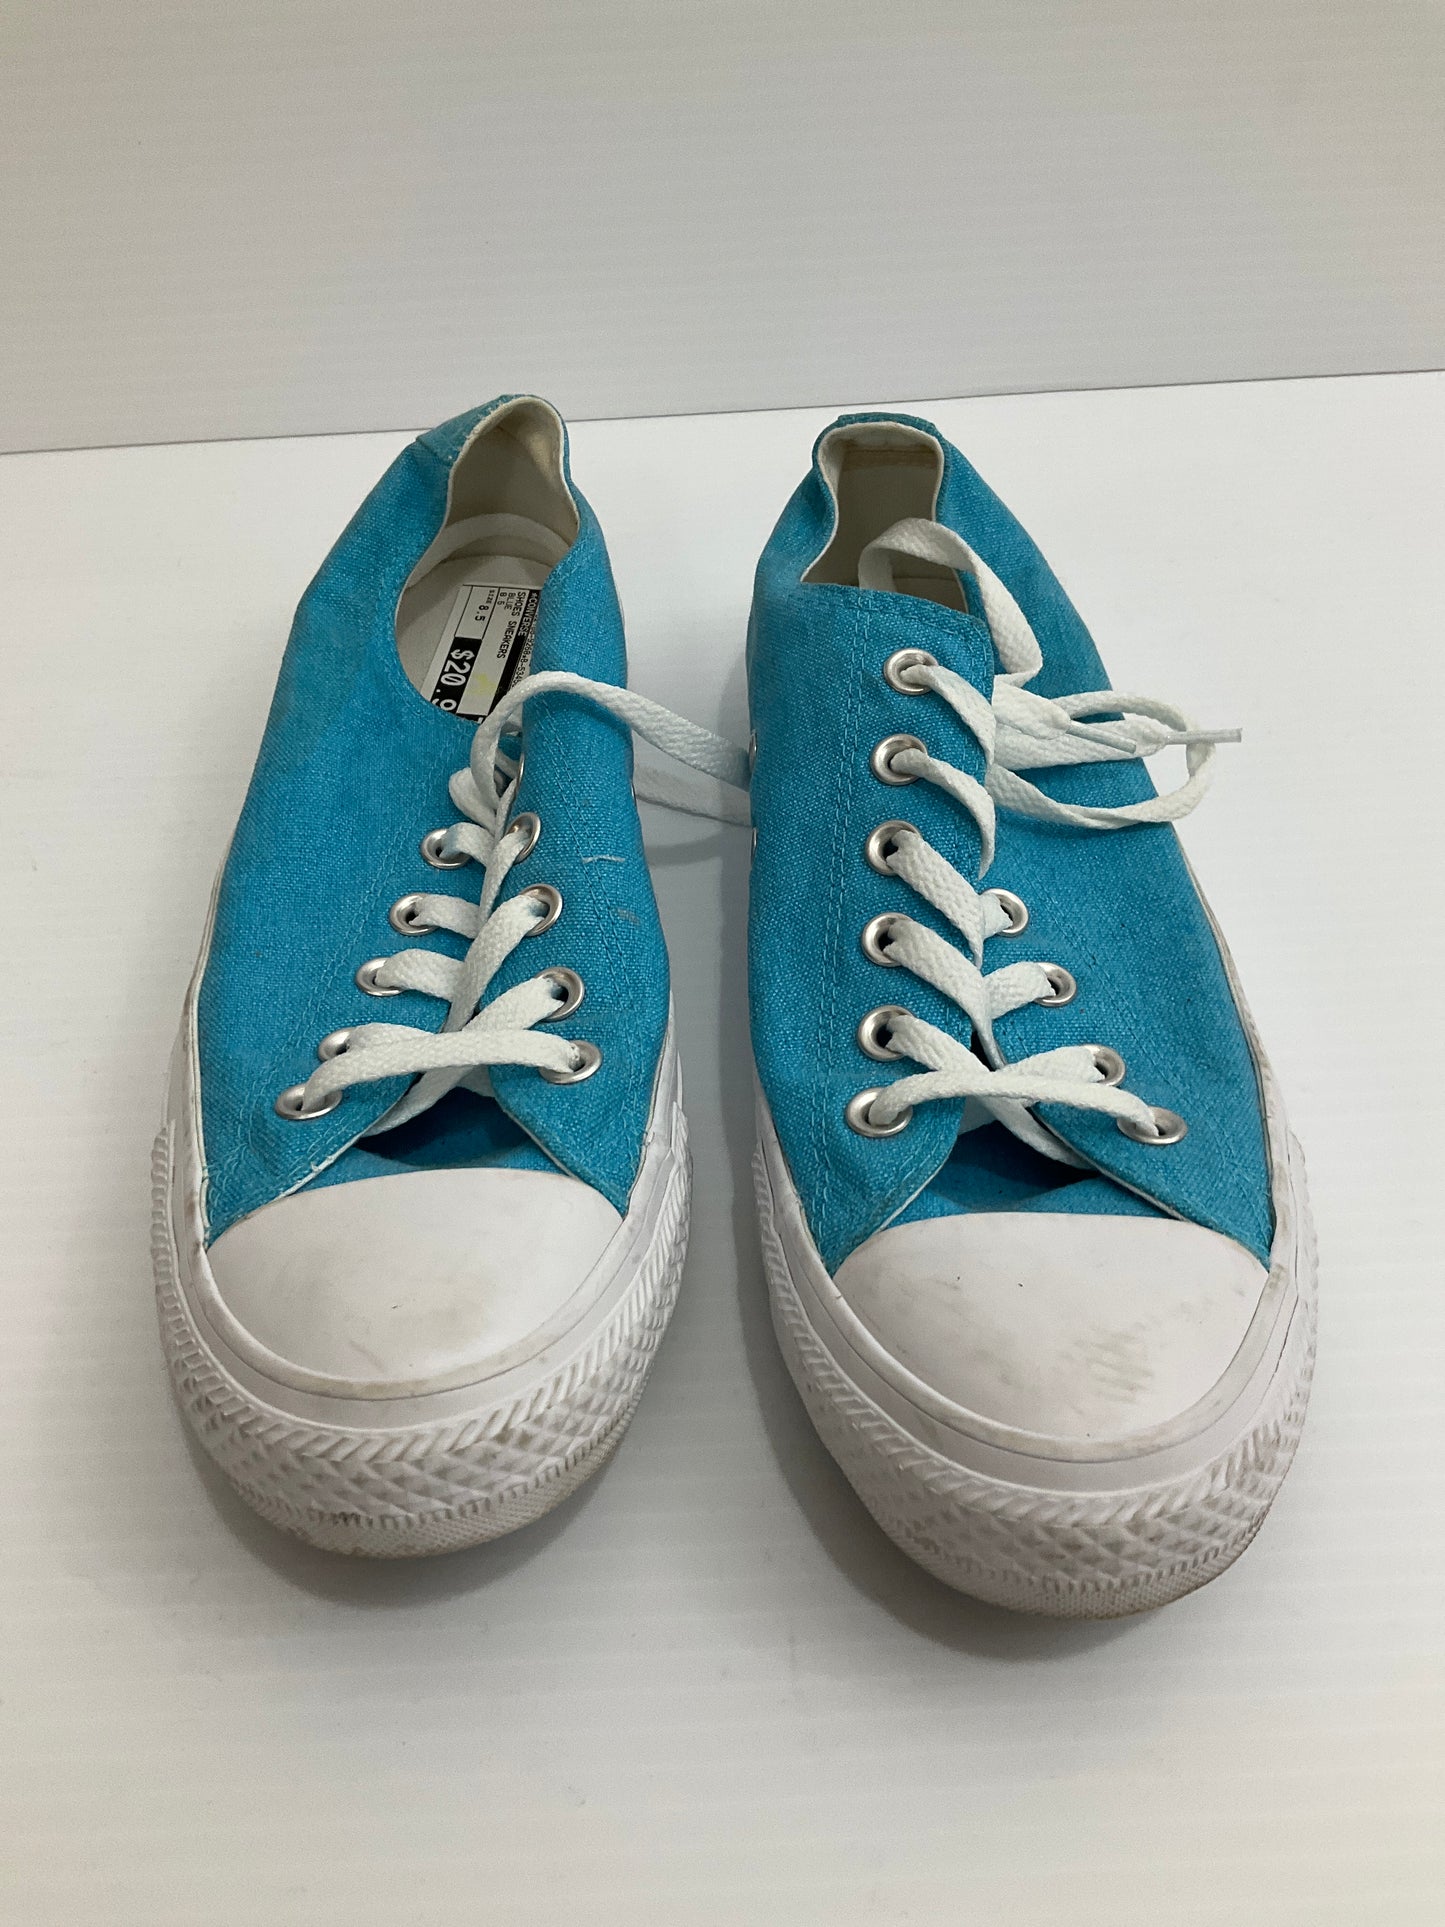 Shoes Sneakers By Converse  Size: 8.5